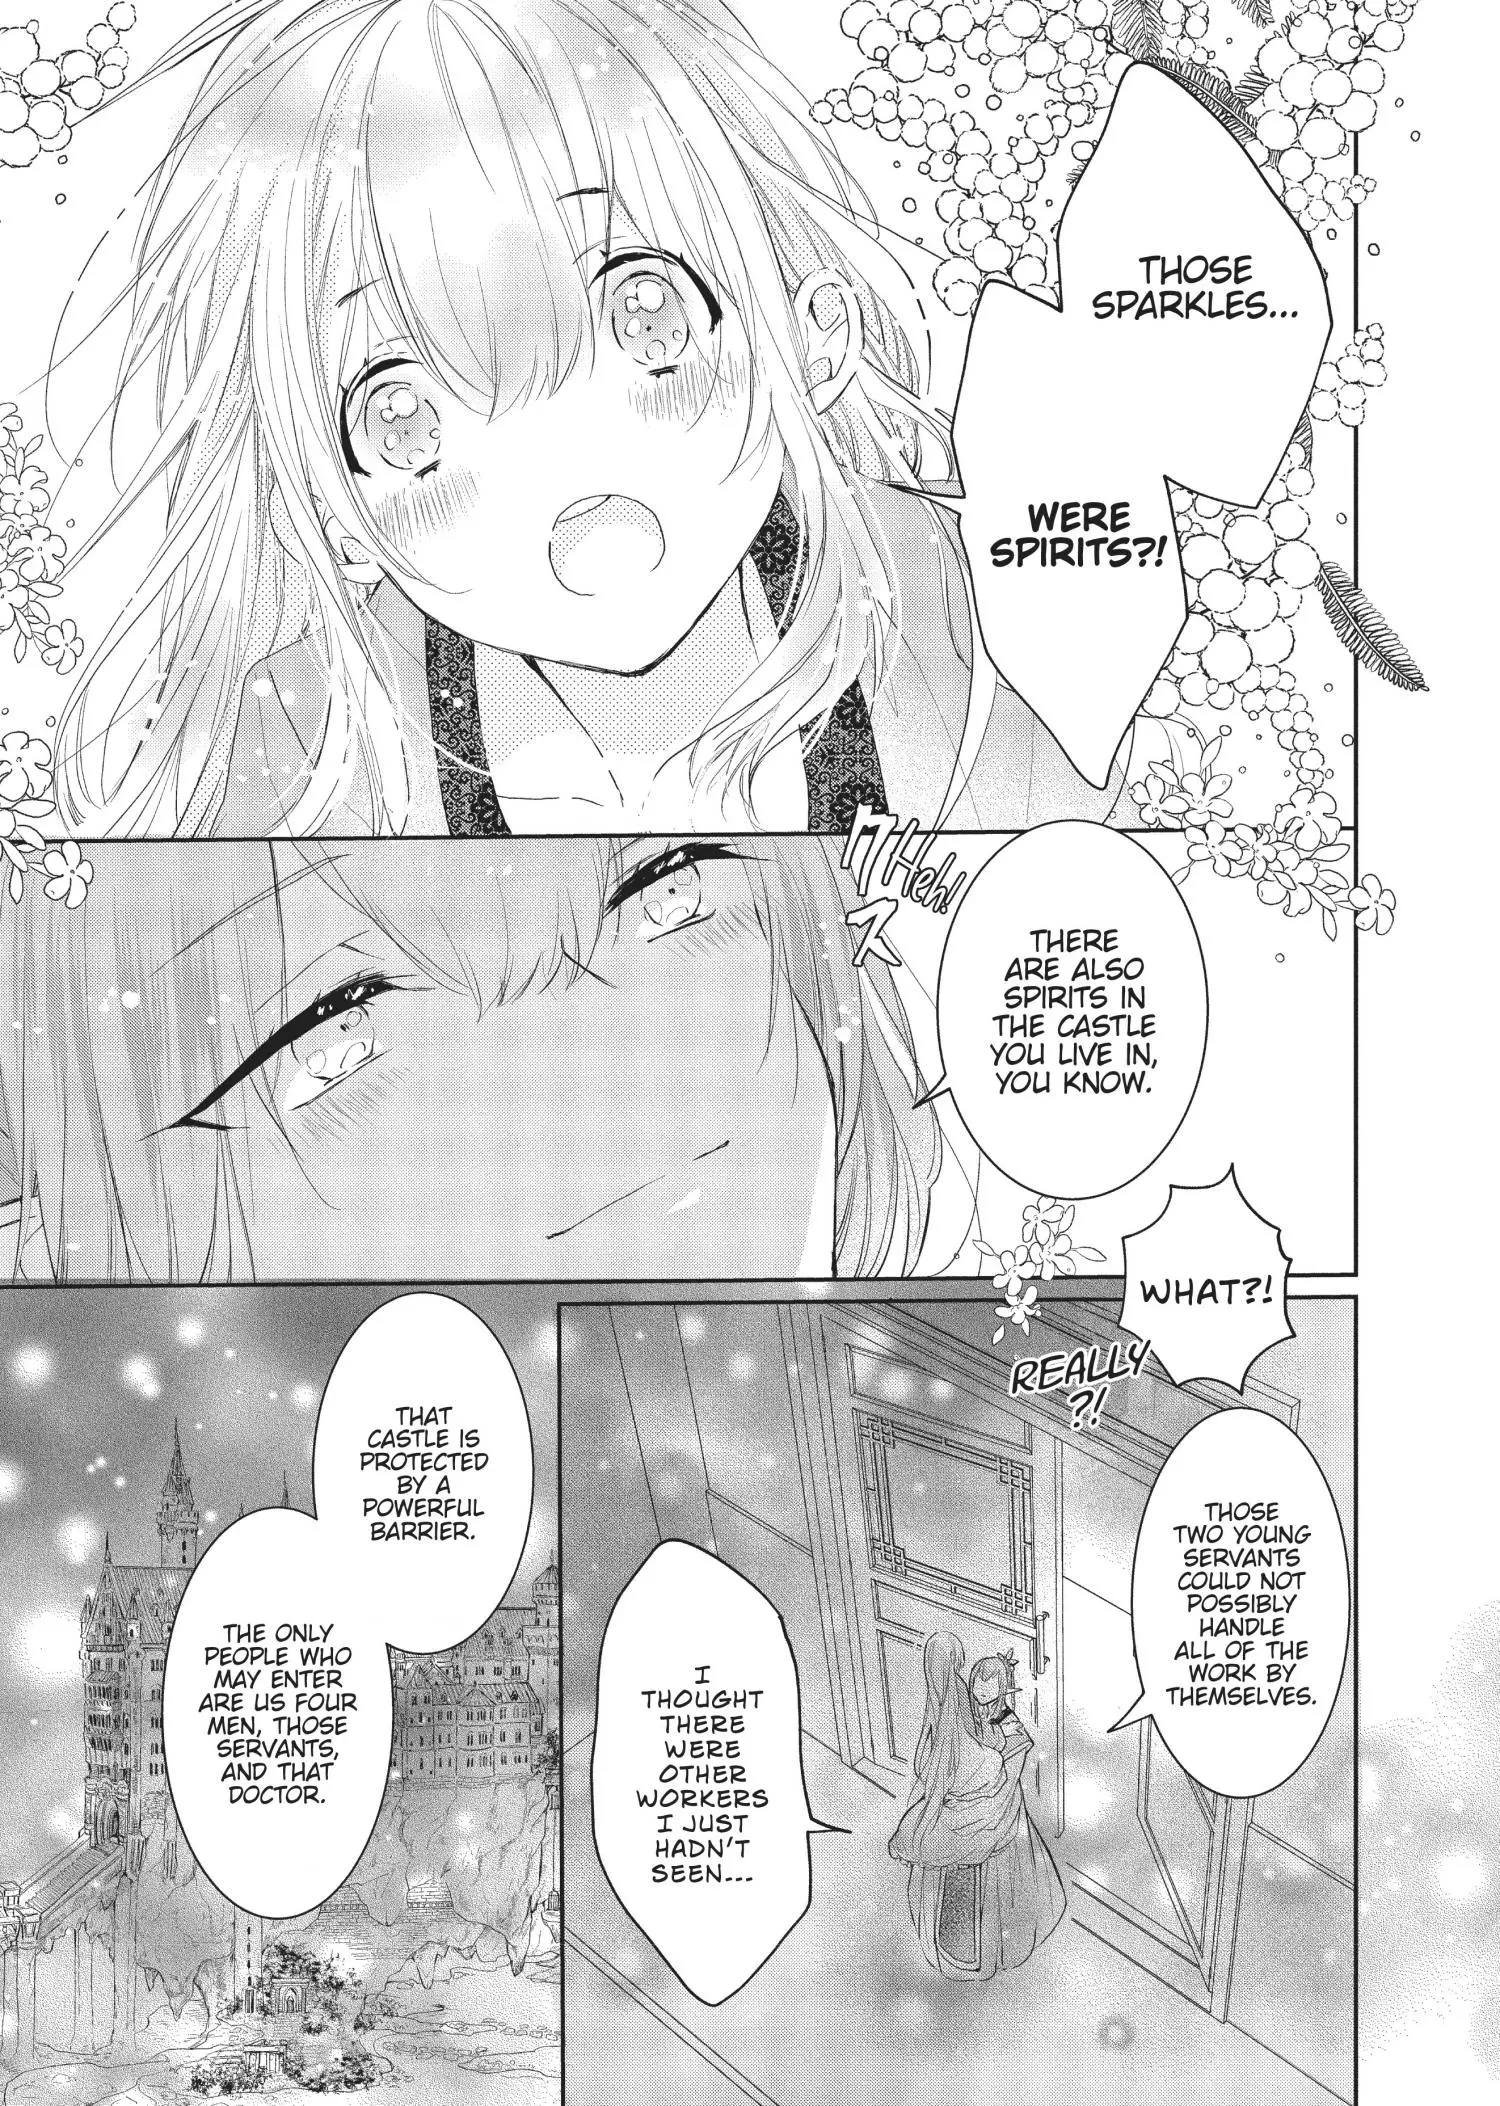 Outbride -Ikei Konin- - 16 page 14-d77911a2